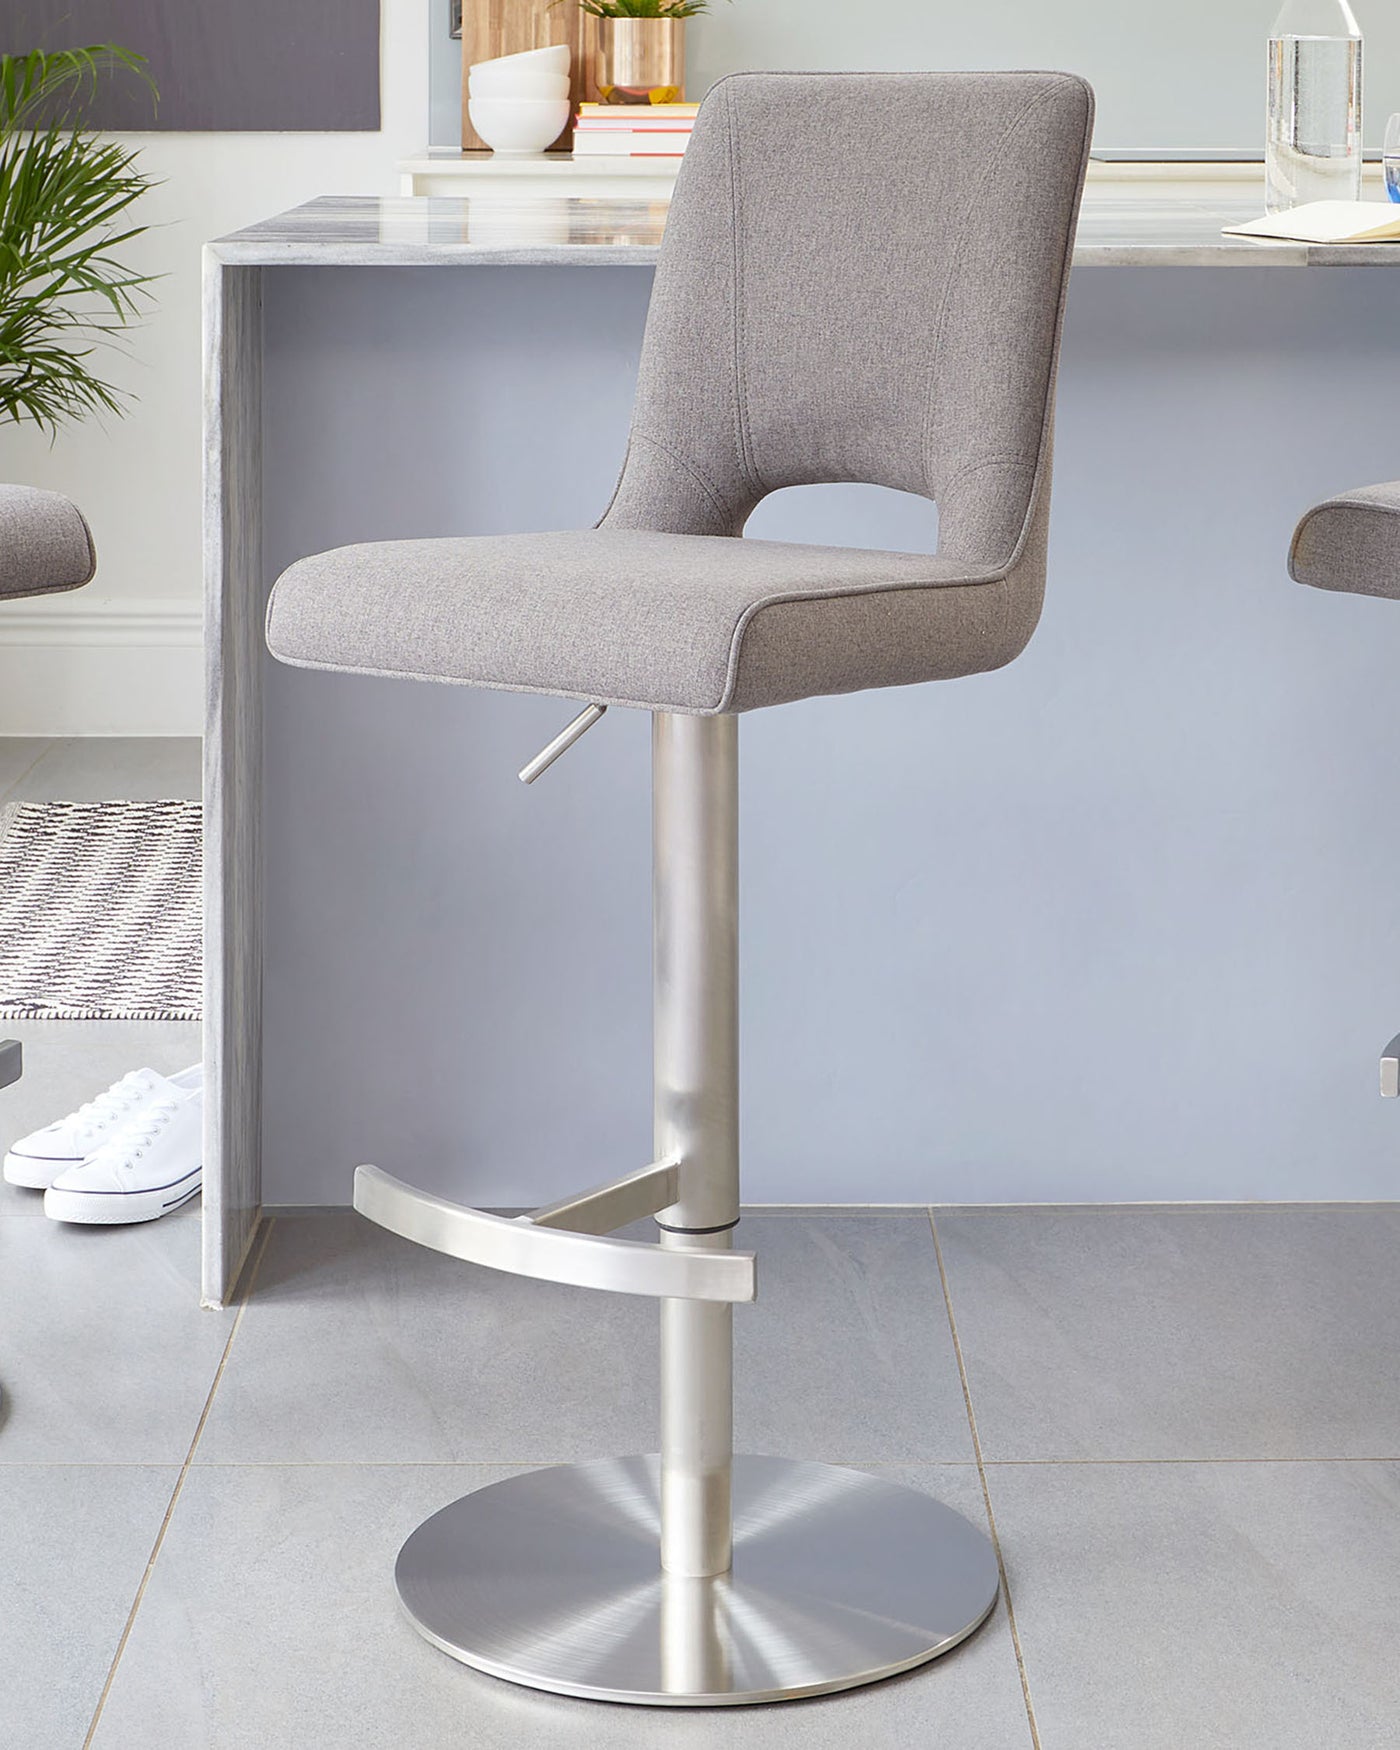 Modern bar stool with a grey upholstered seat and a curved backrest, featuring a sleek metallic pedestal base with a built-in footrest and a round, flat base plate. The stool's height appears to be adjustable, suggested by the visible lever under the seat.